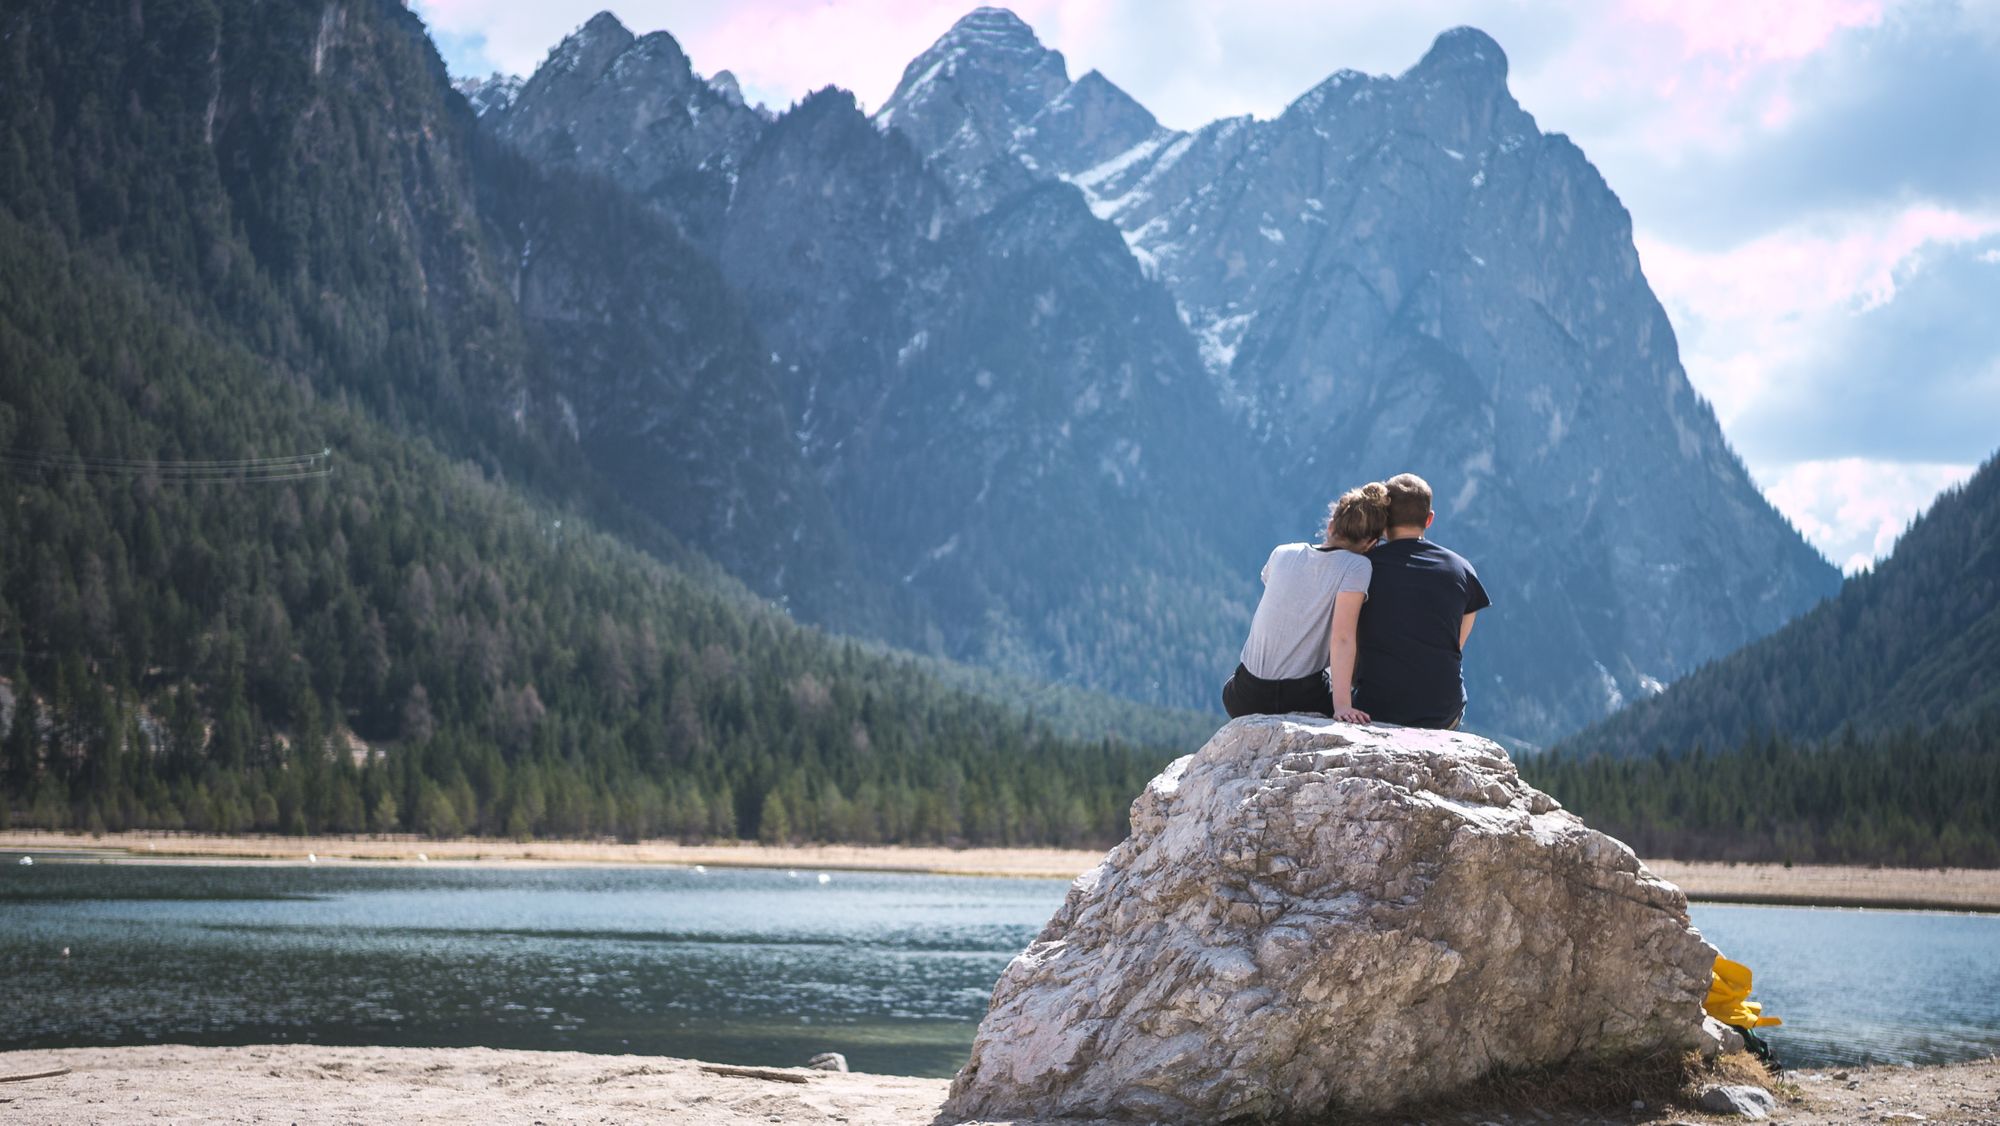 Top romantic weekend destinations for a getaway with your partner